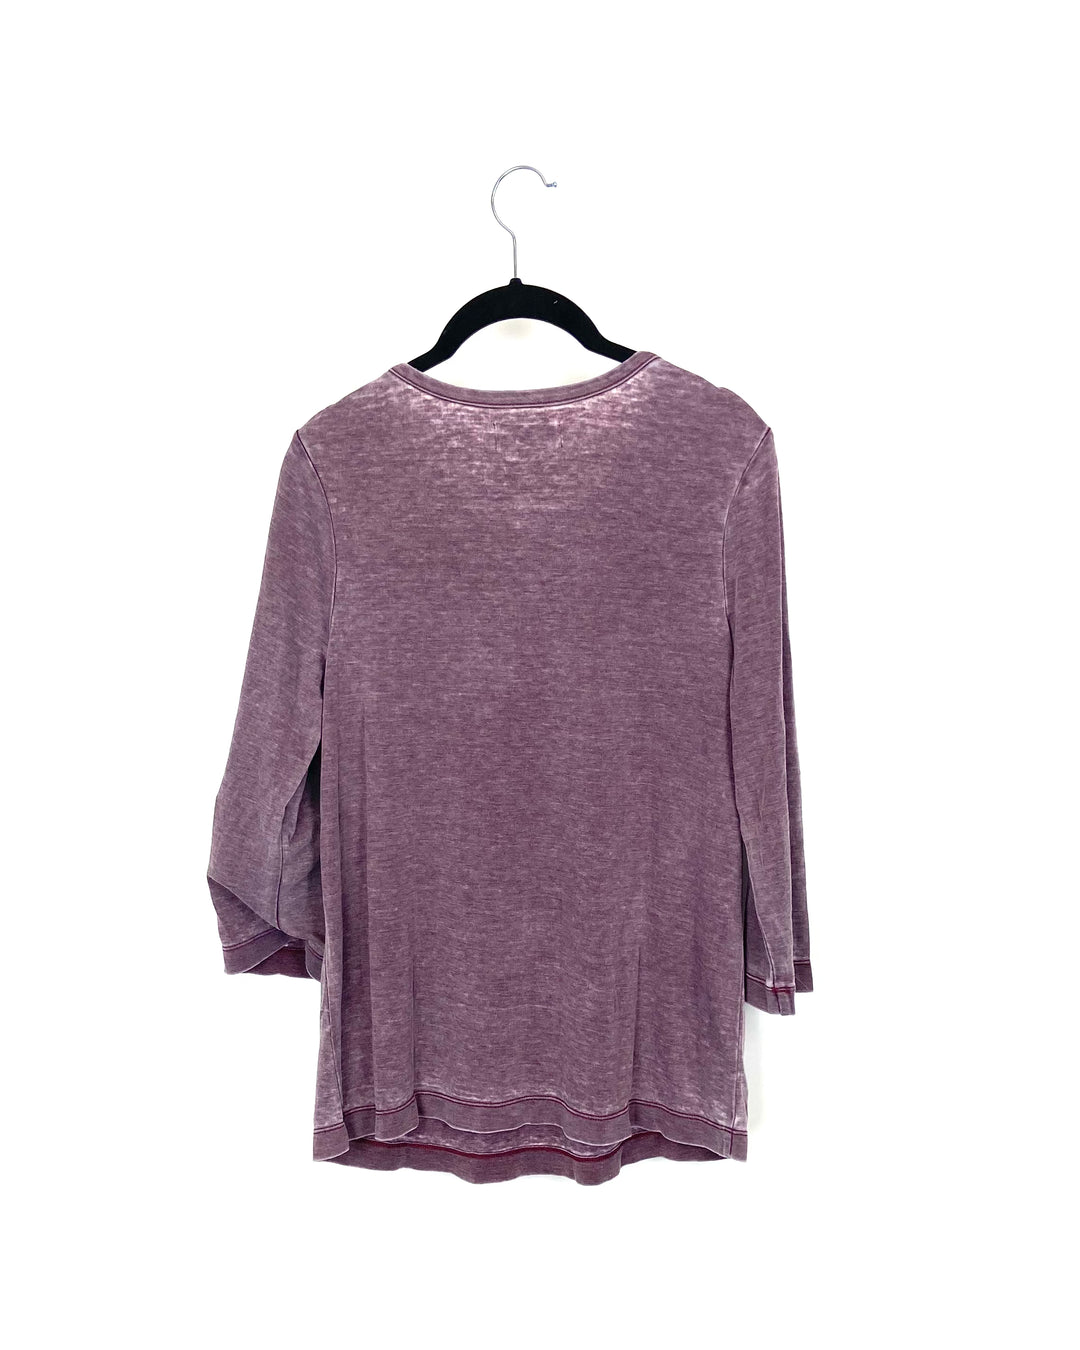 Plum Long Sleeve Top - Size Small